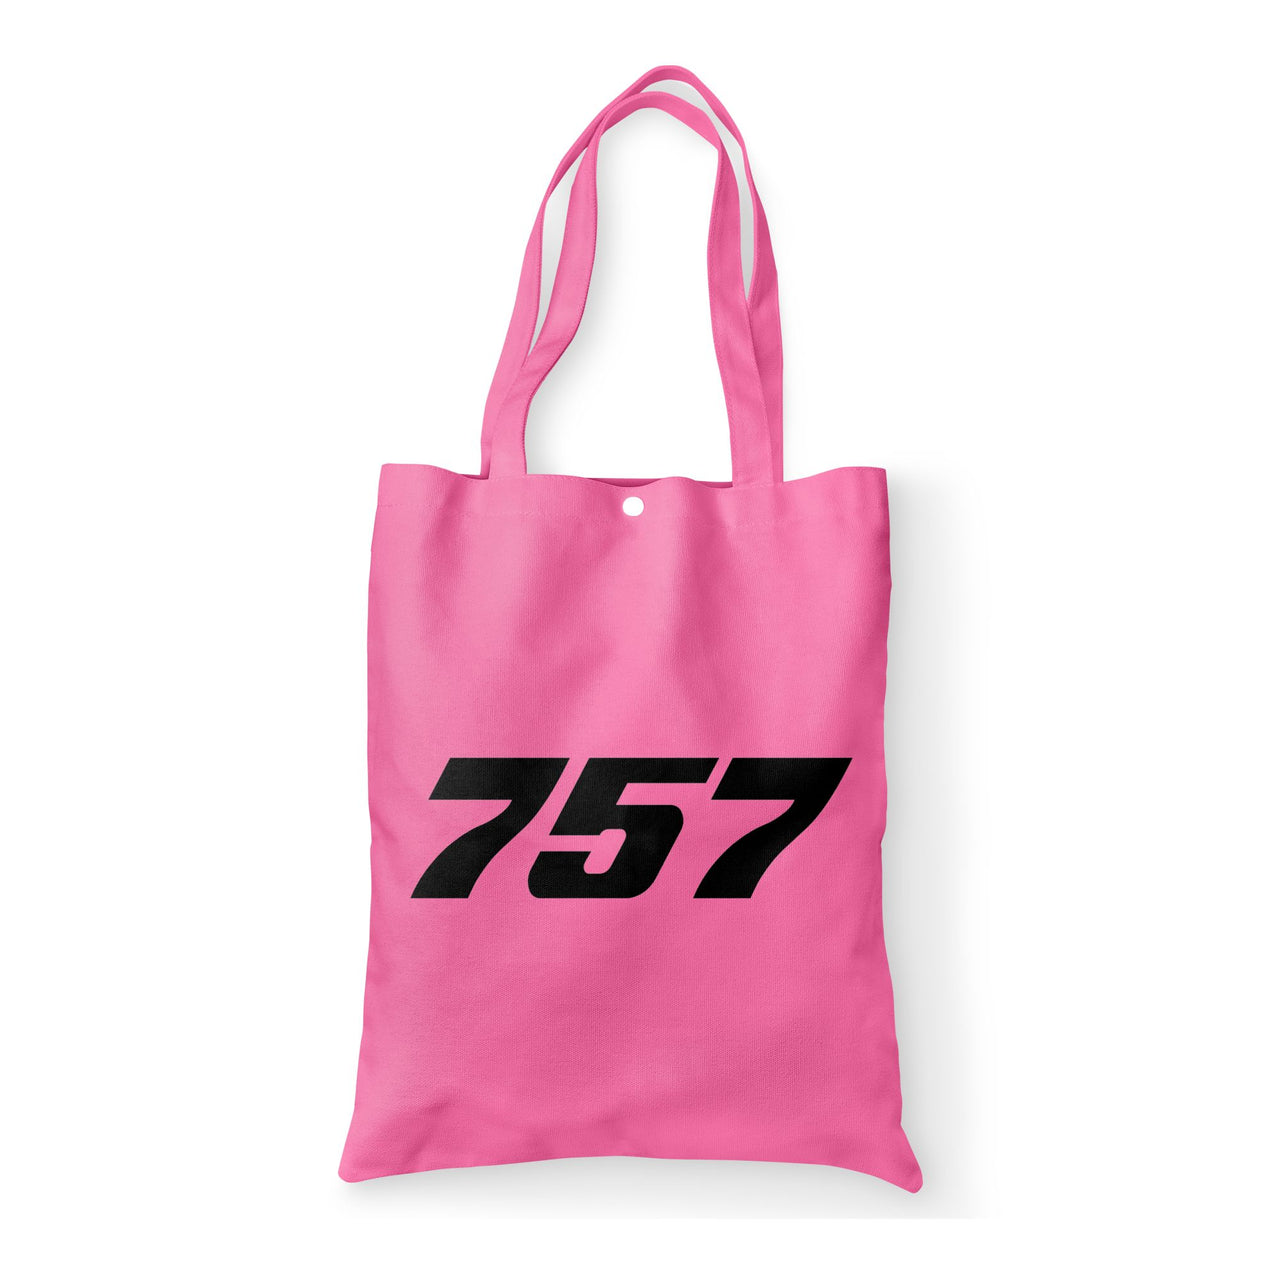 757 Flat Text Designed Tote Bags